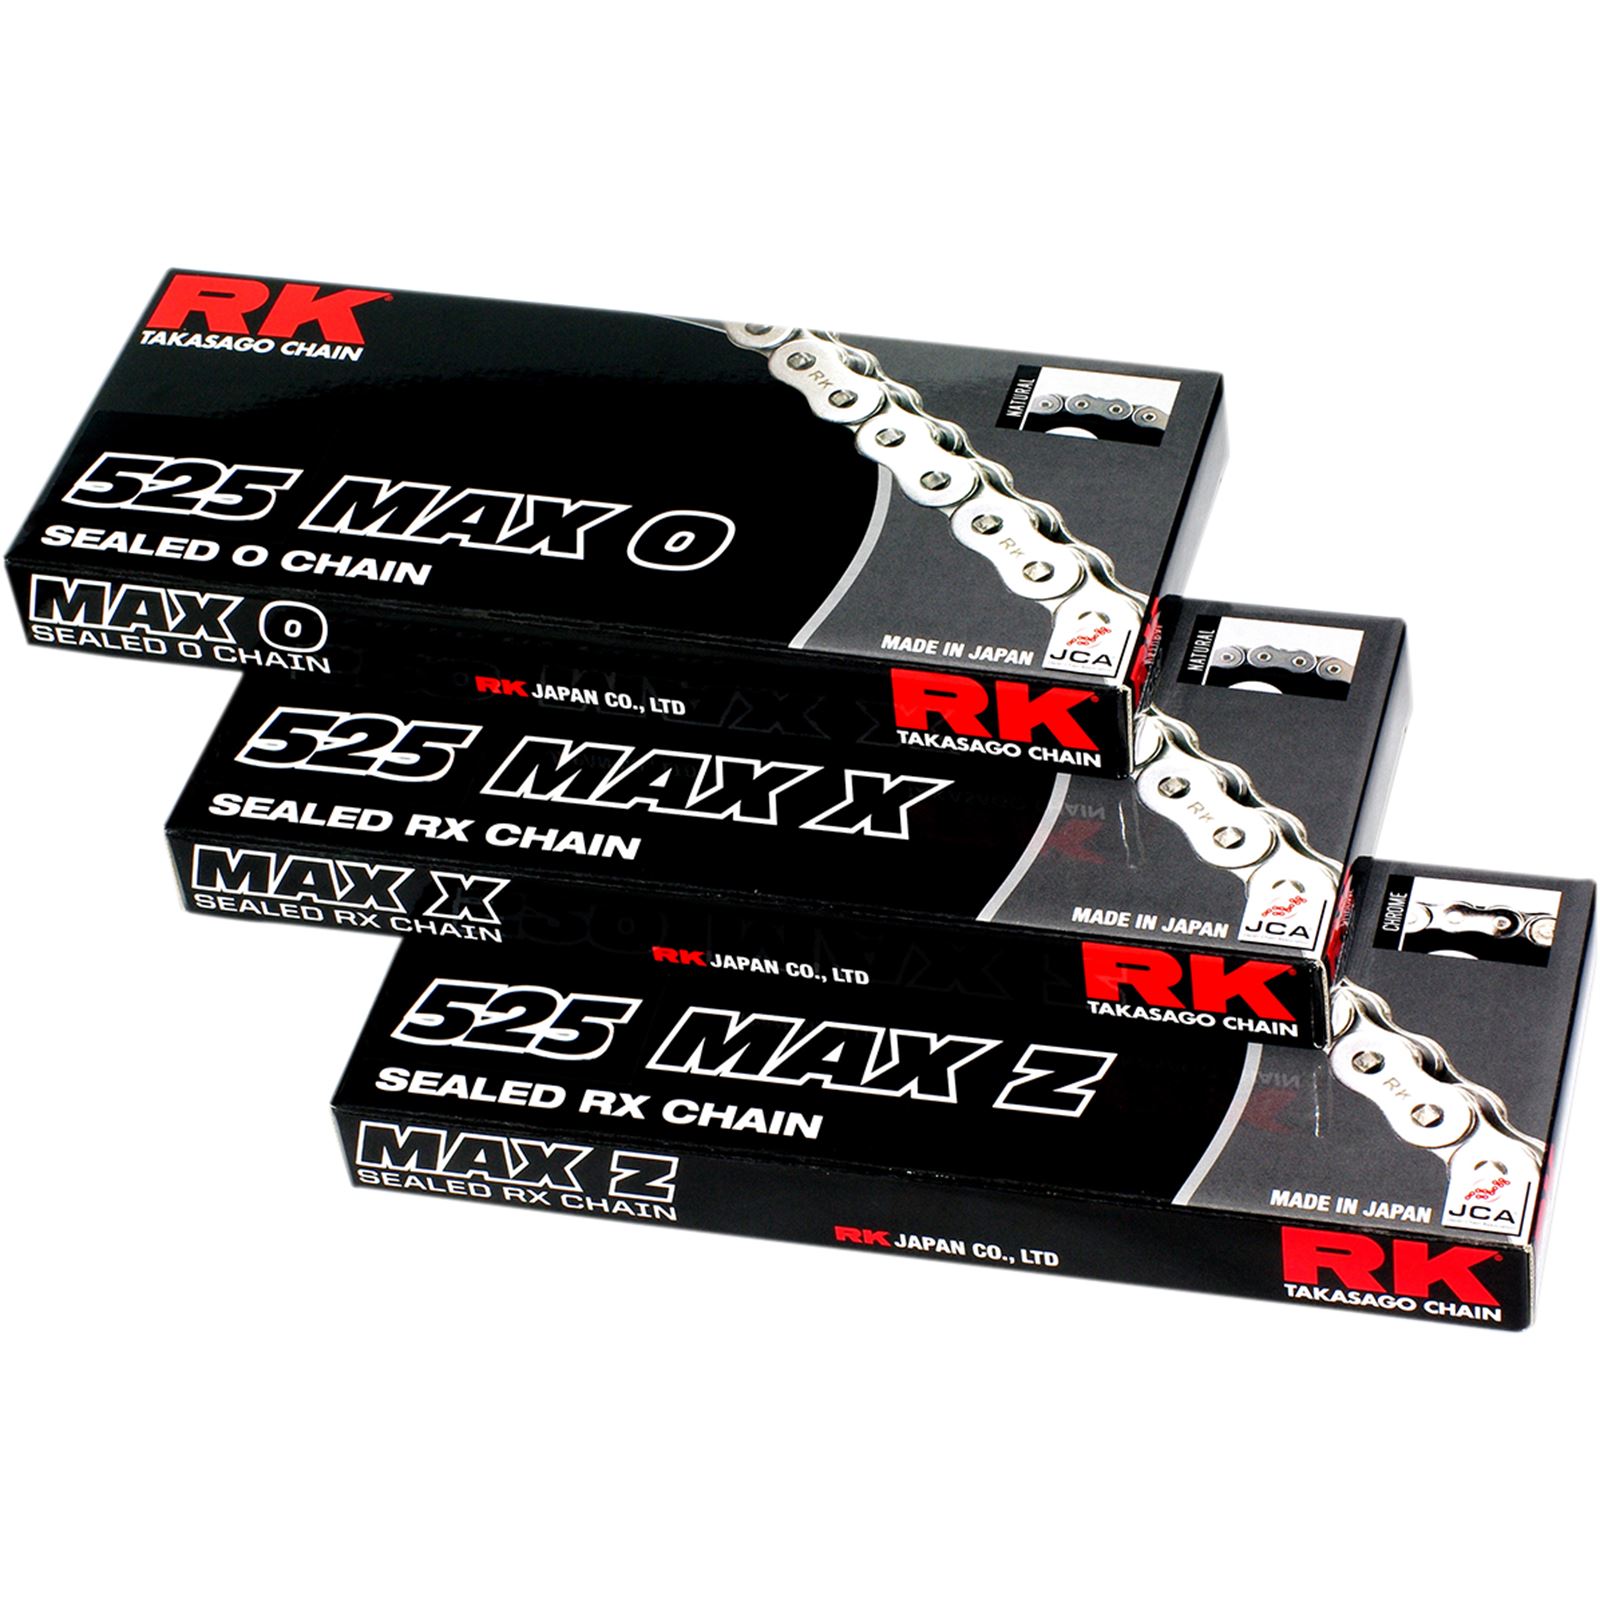 RK Excel 525 Max X - Chain - 120 Links - Blue